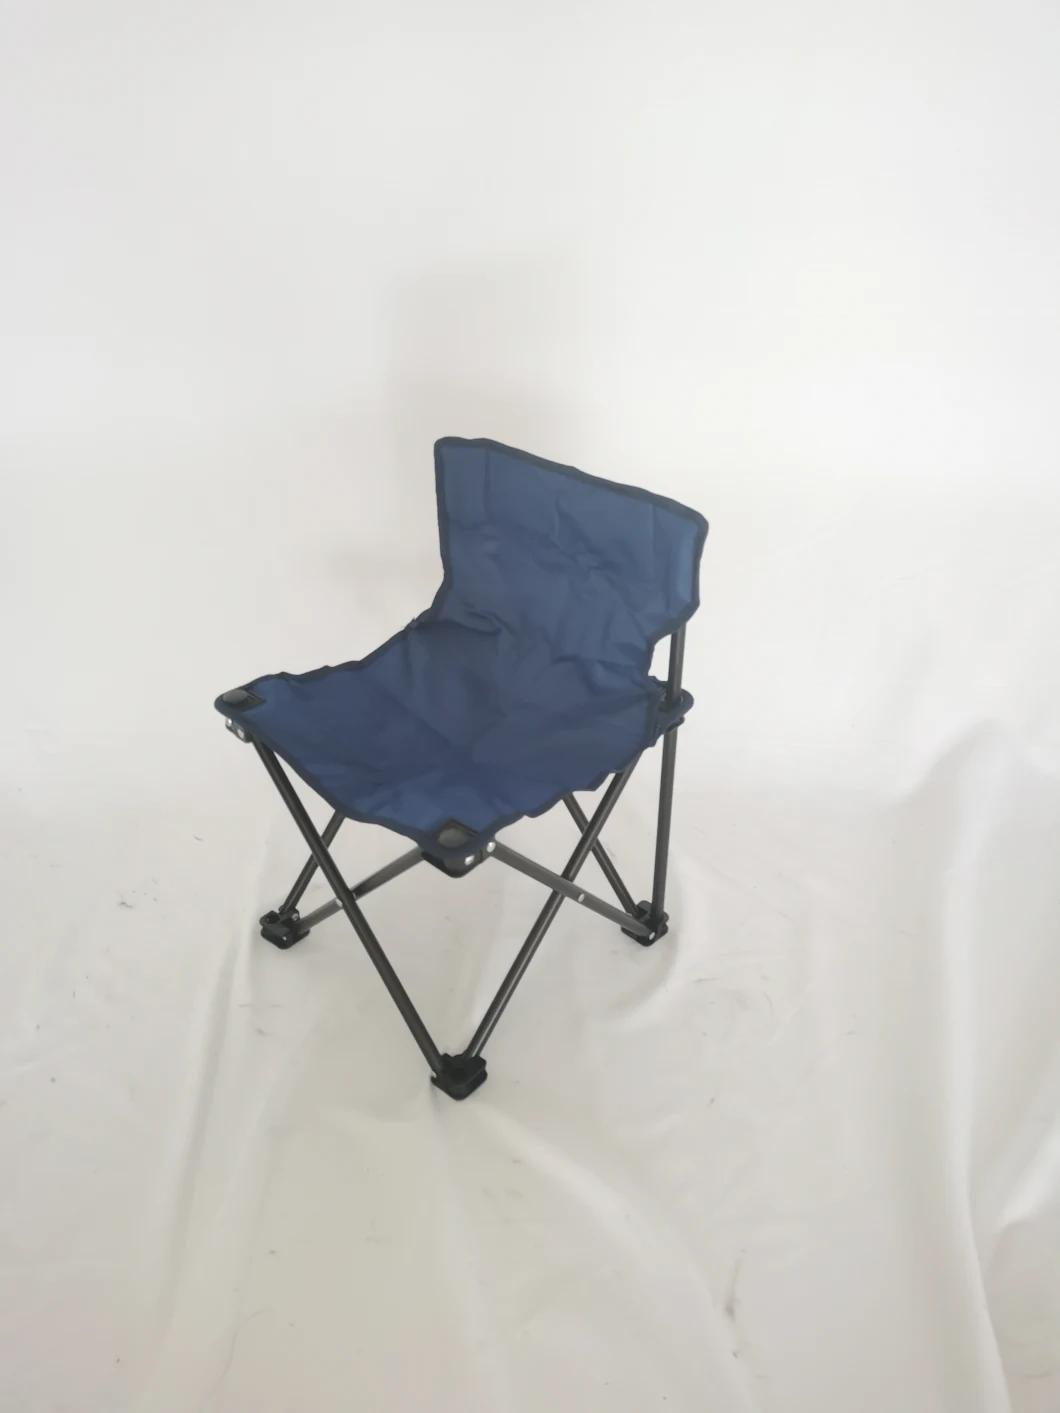 Classic Design Folding Camping Chair with Cooler Bag Foldable for Outdoor Camping Chair